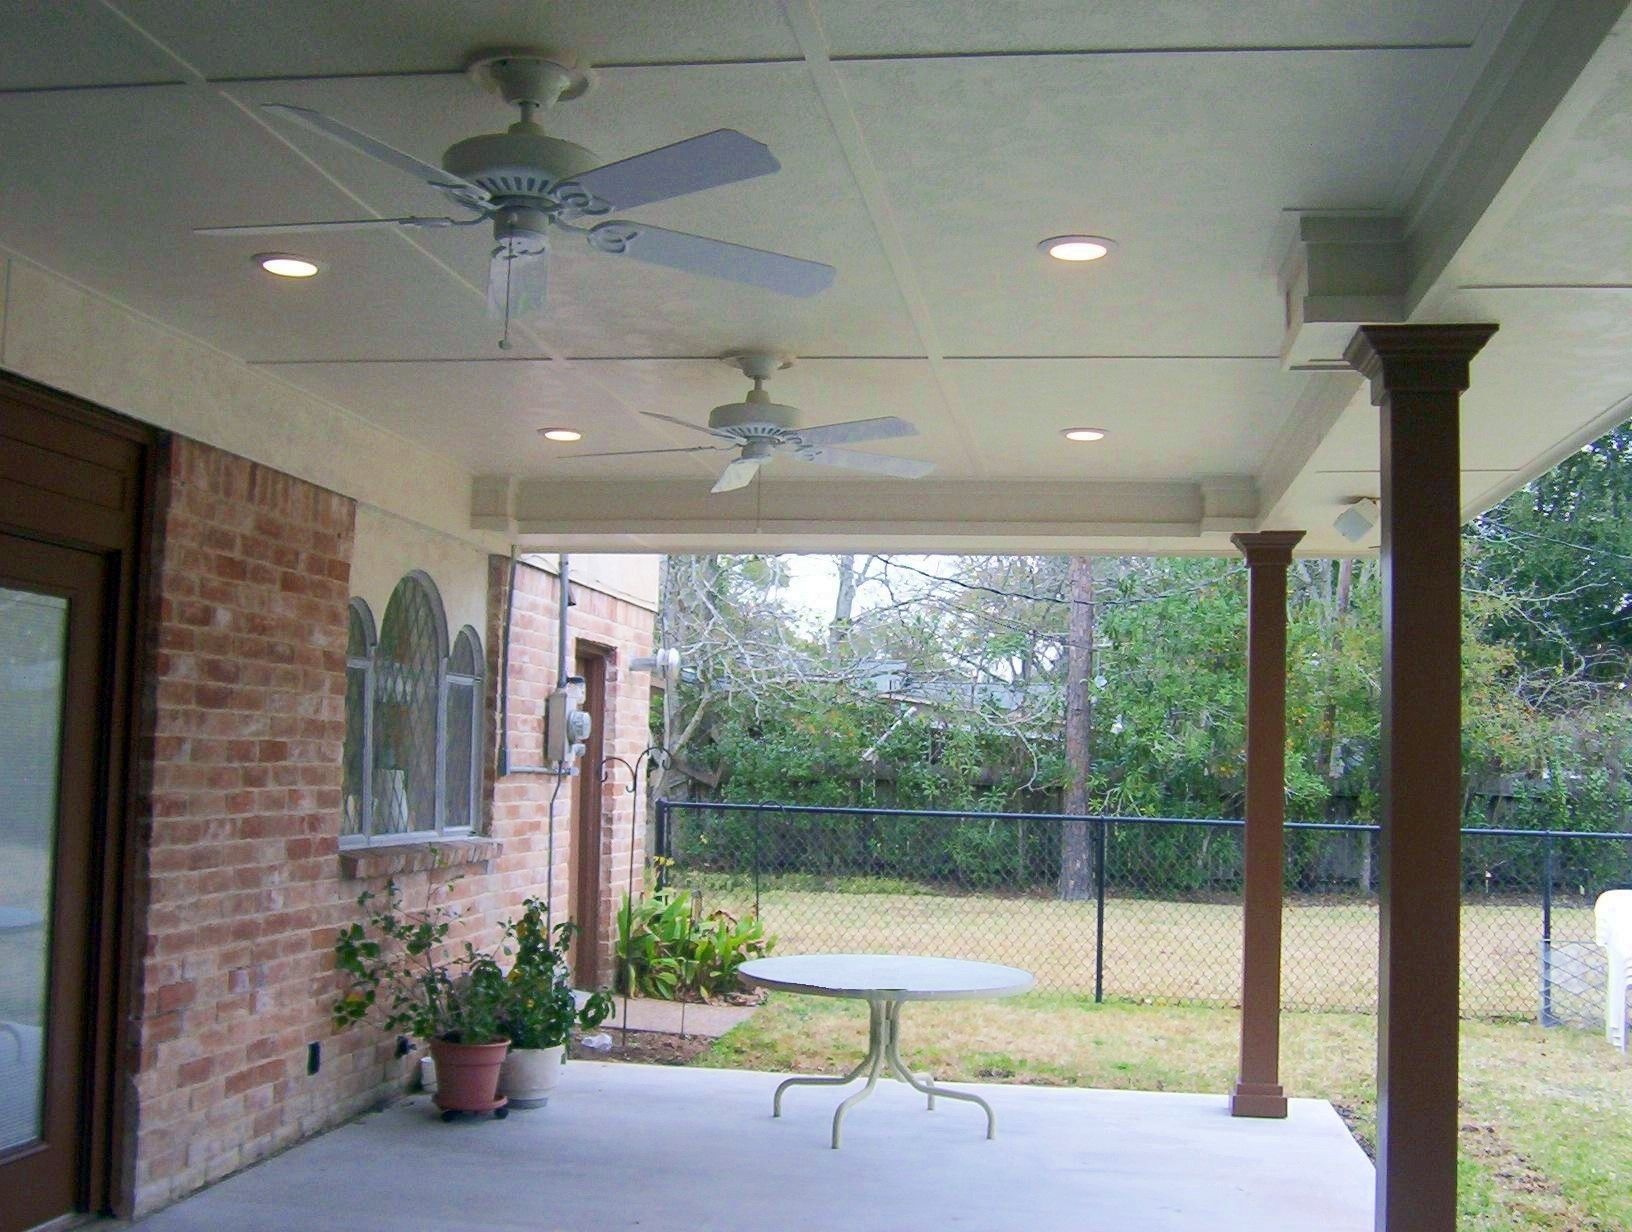 Ceiling Fans : Compact Ceiling Fans With Lights Mini Fan White With Large Outdoor Ceiling Lights (View 14 of 15)